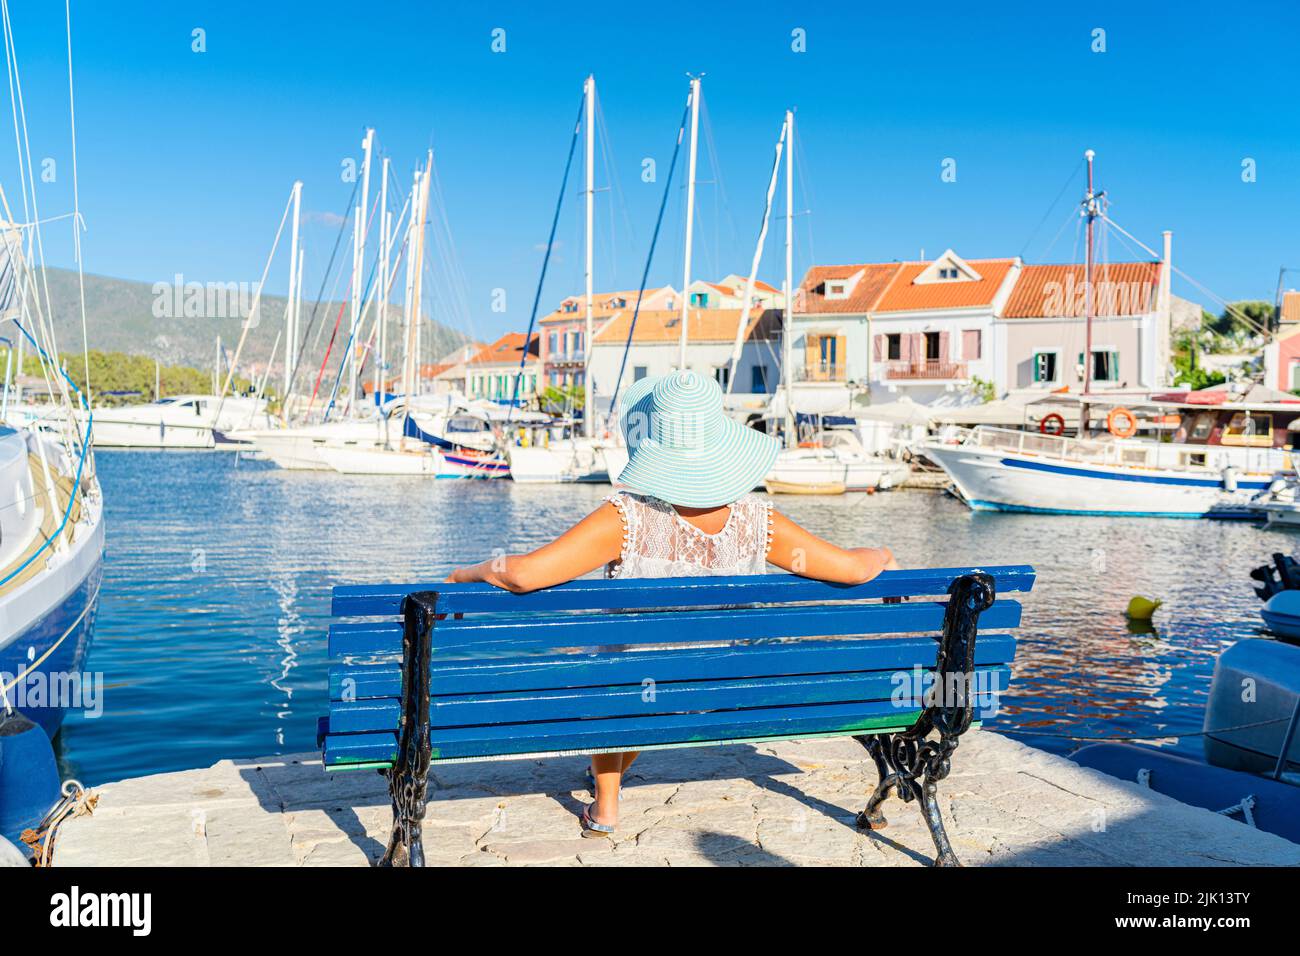 Carefree woman relaxing on a bench in the small harbor of Fiskardo, Kefalonia, Ionian Islands, Greek Islands, Greece, Europe Stock Photo